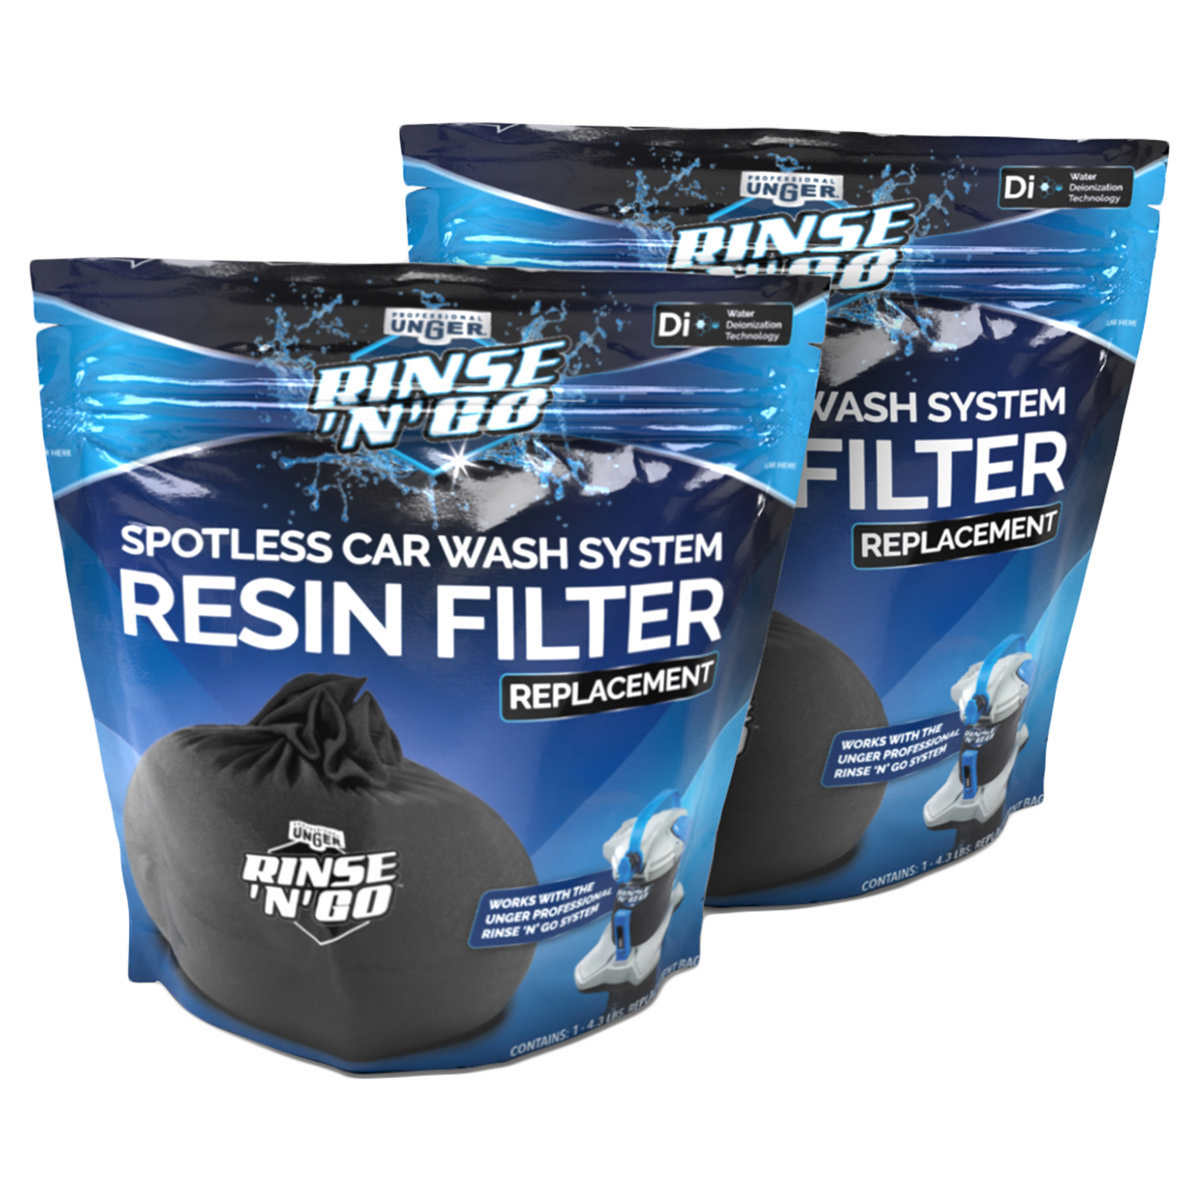 Unger Professional Rinse'n'Go Plus Spotless Car Wash Resin Filter  Replacement 2-pack